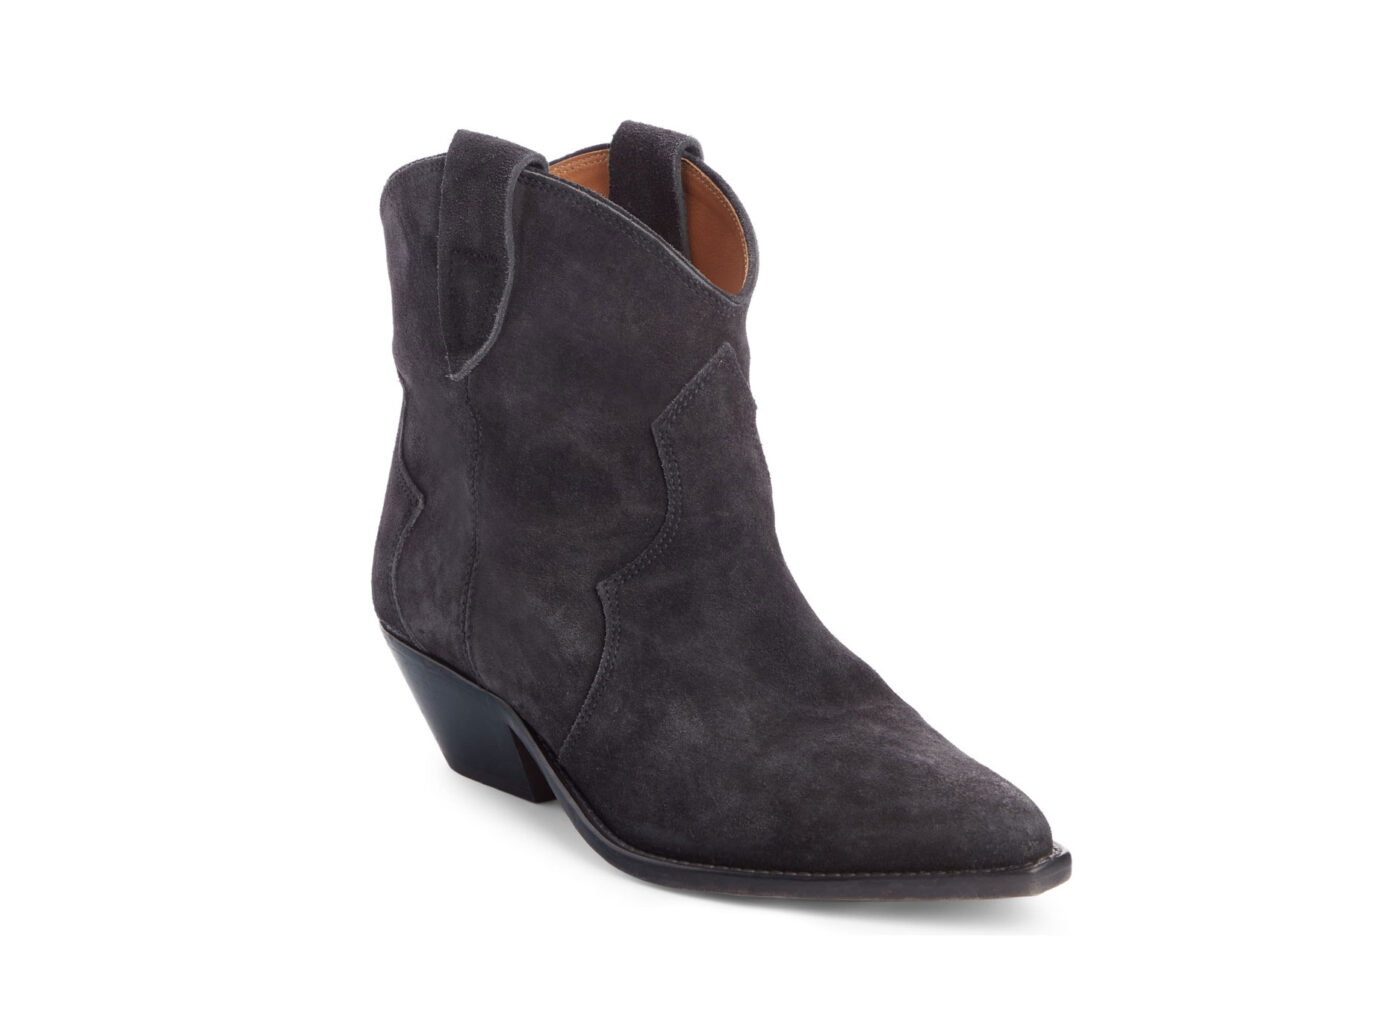 Isabel Marant Dewina Western Boot in Taupe